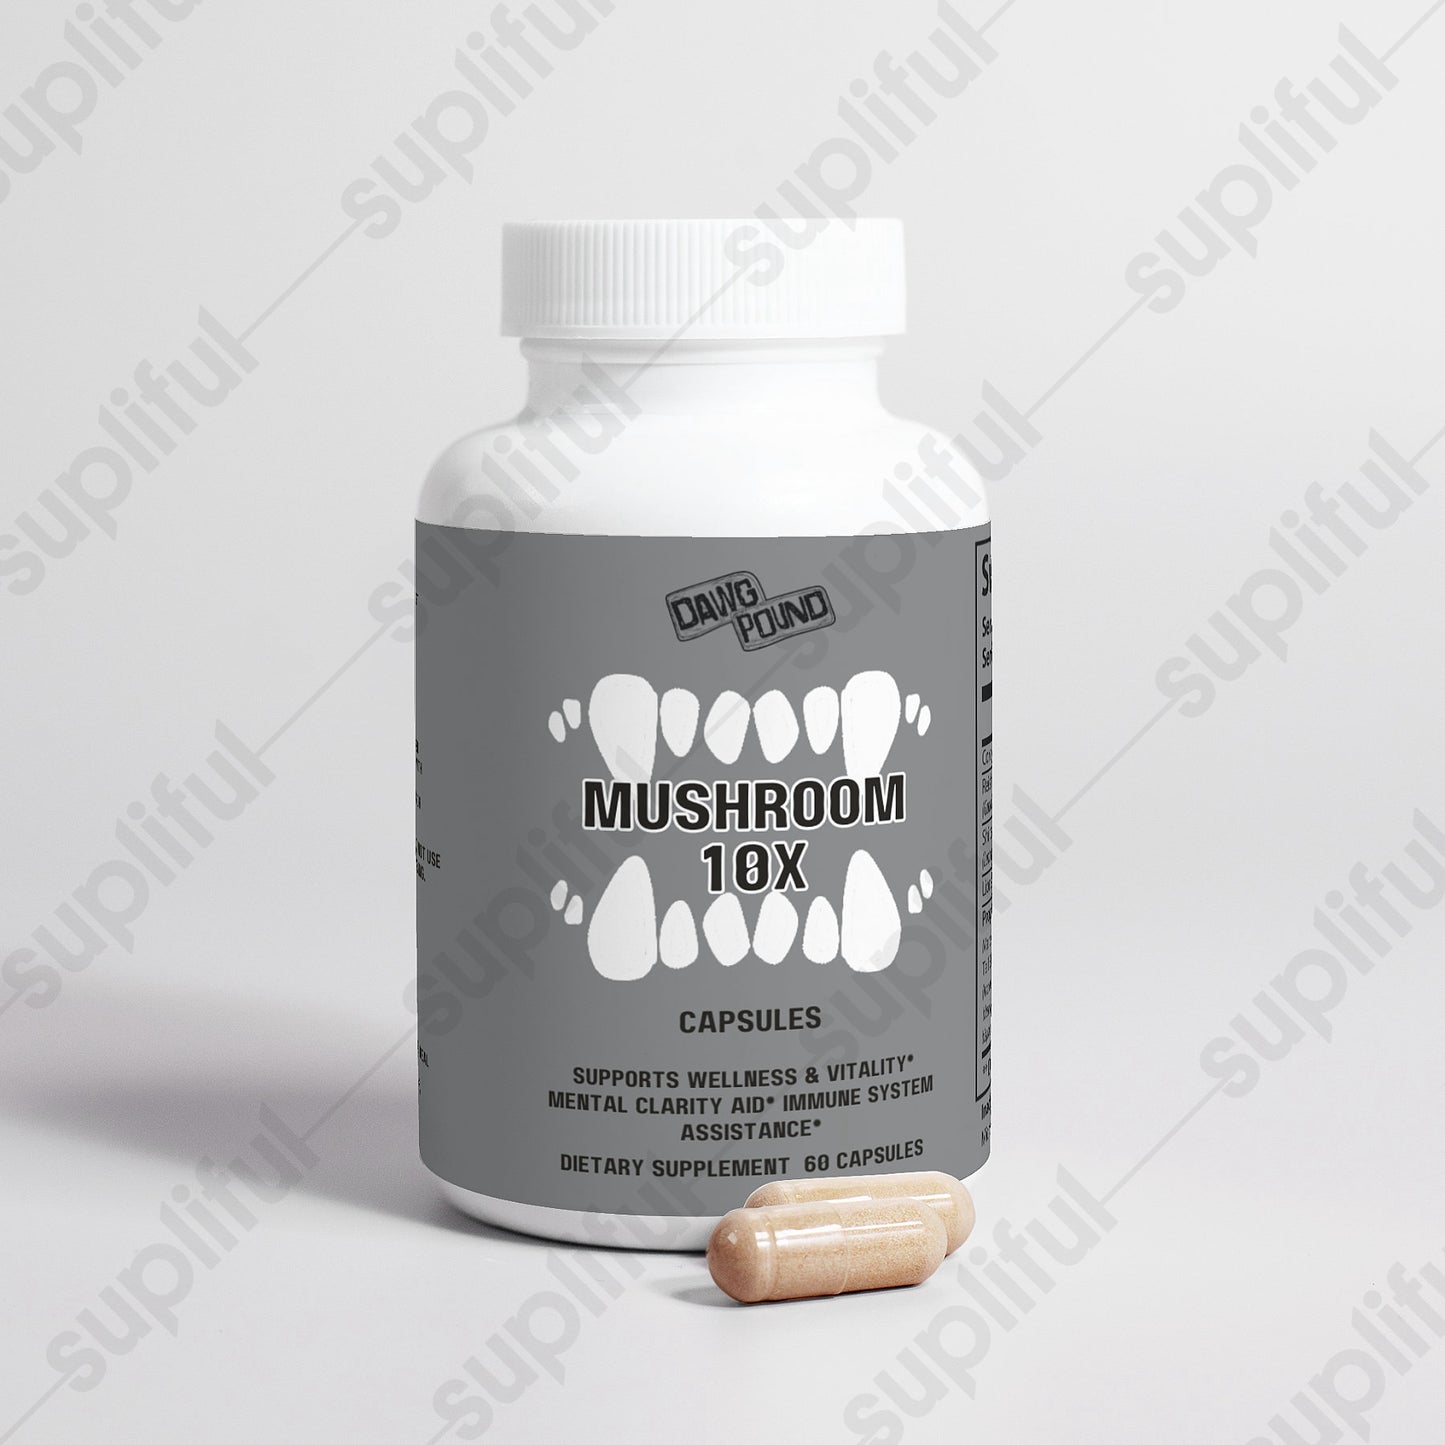 Dawg Pound Mushroom 10 X Supplement Capsules- Front View with Capsules in Front 